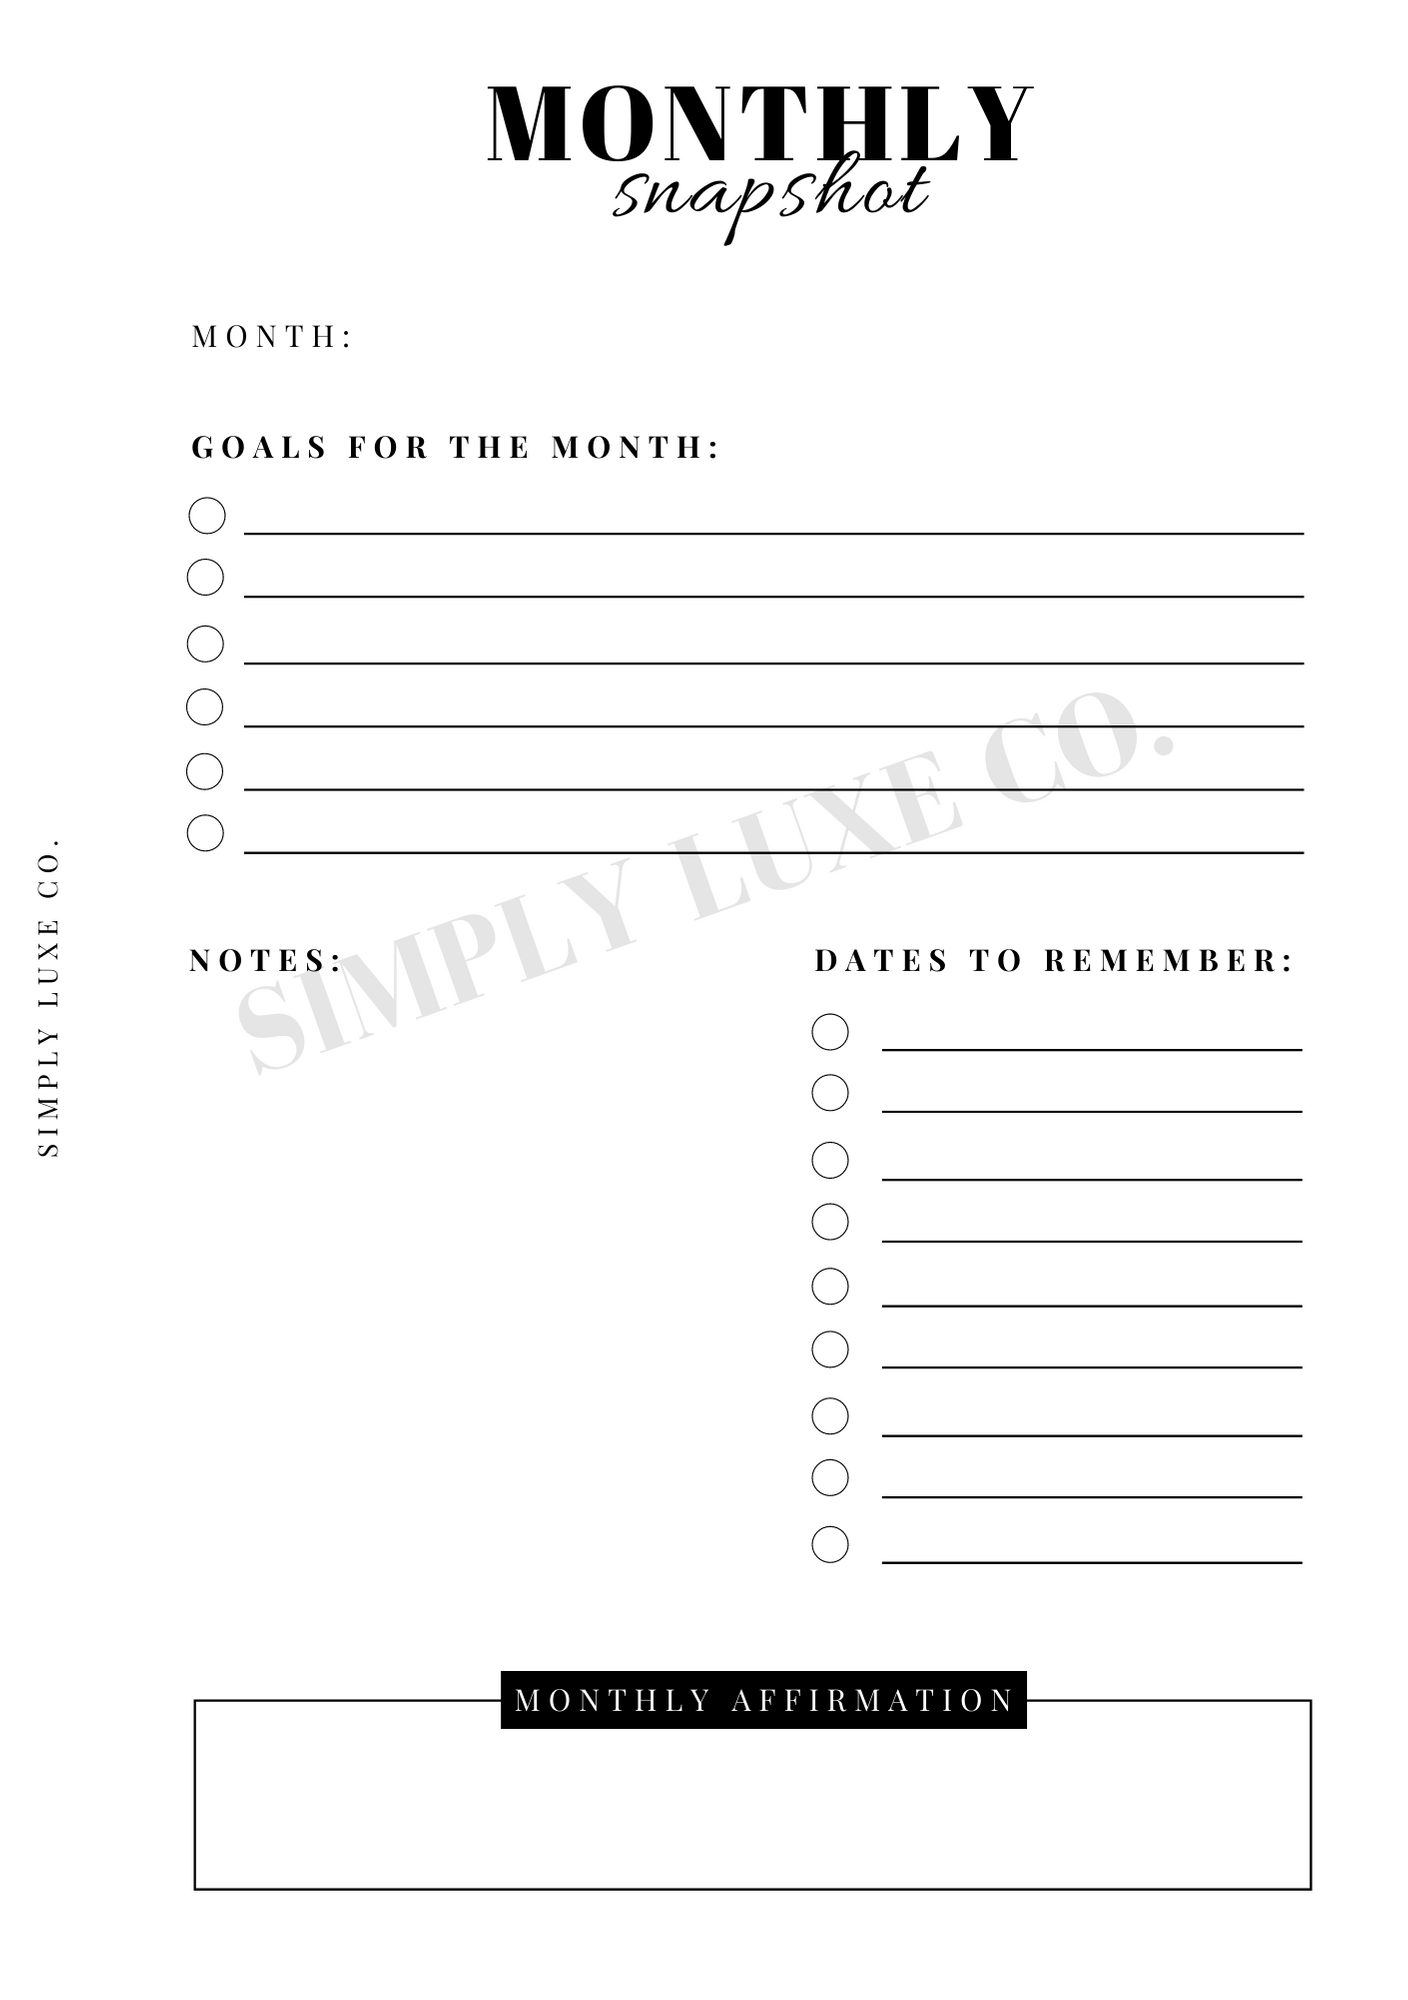 Monthly Snapshot Printable